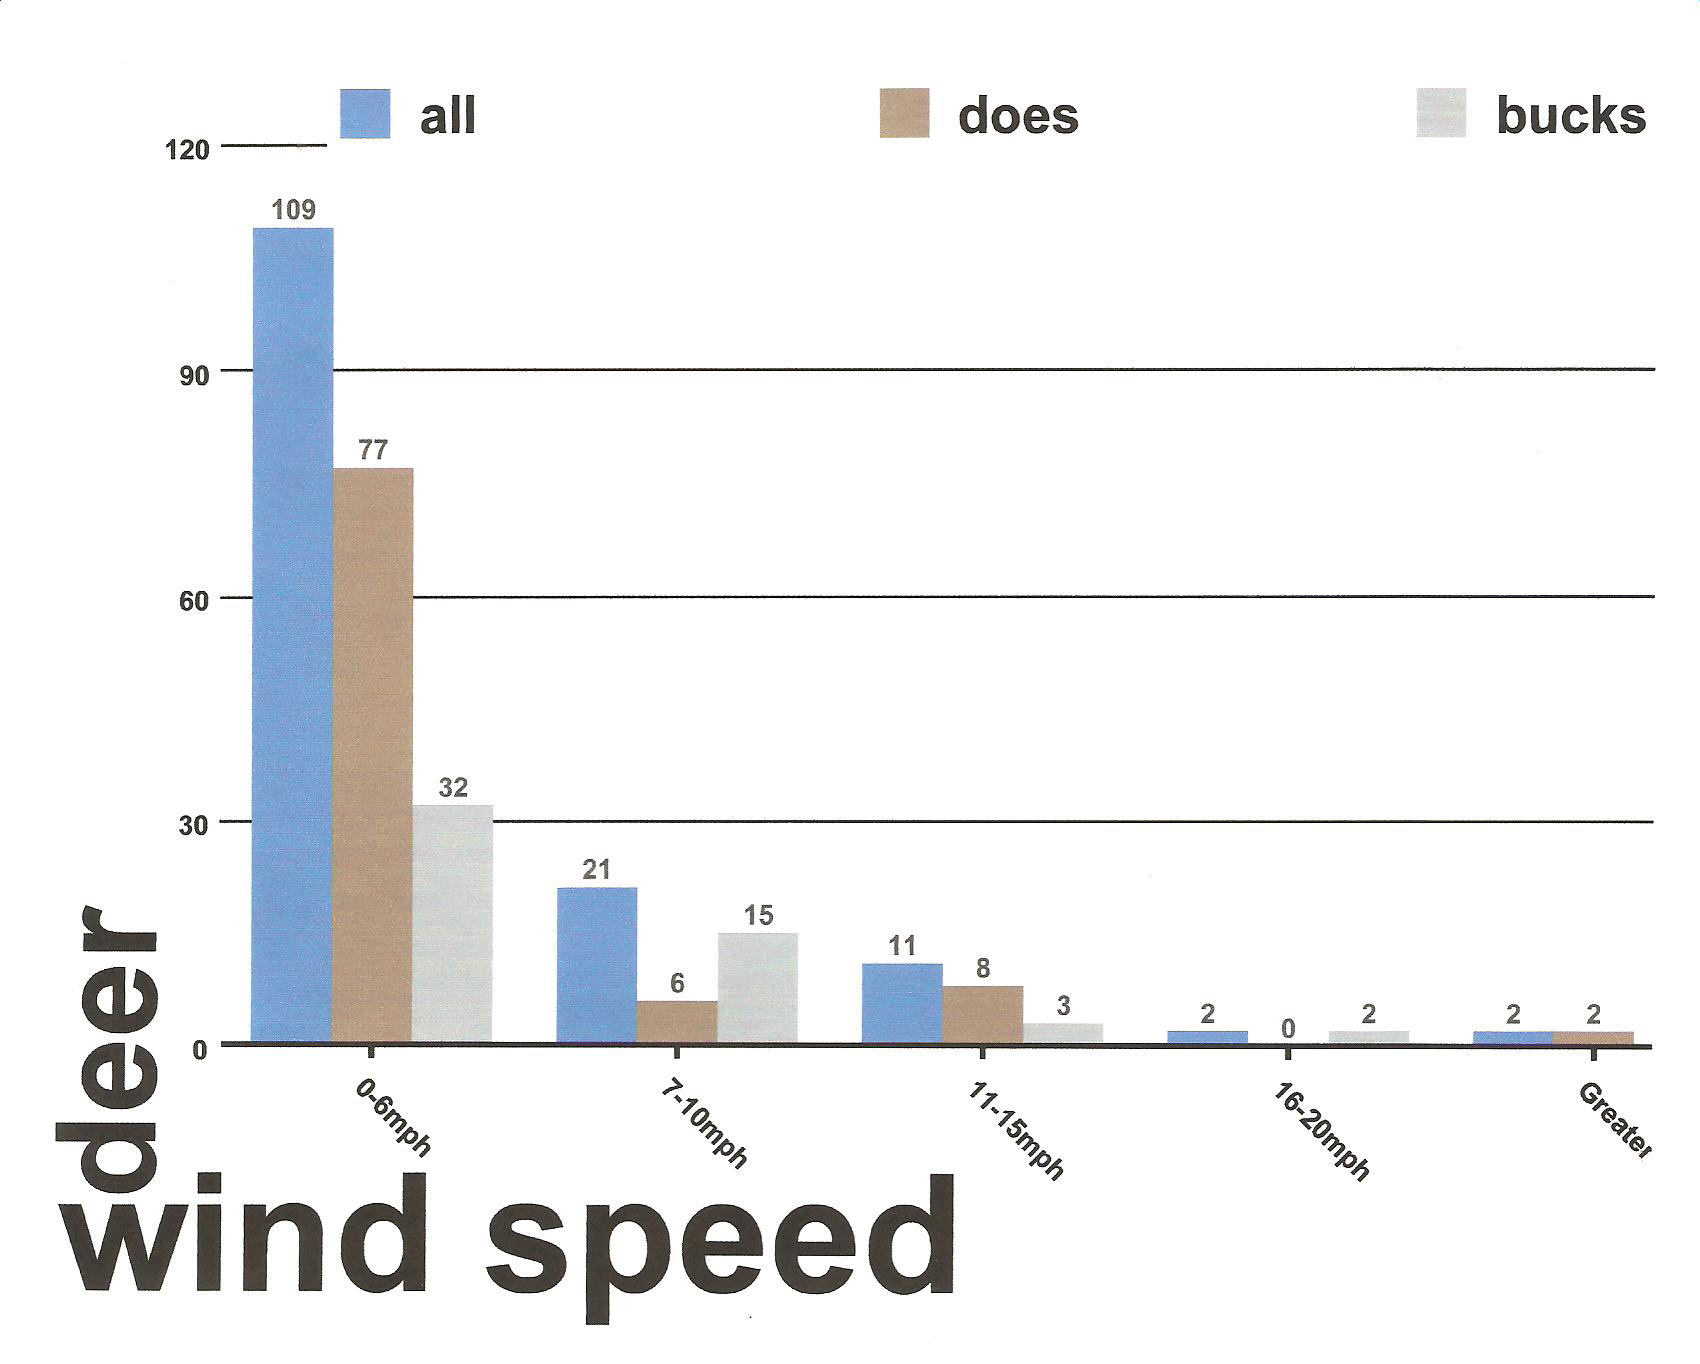 Wind Speed and Buck Movement